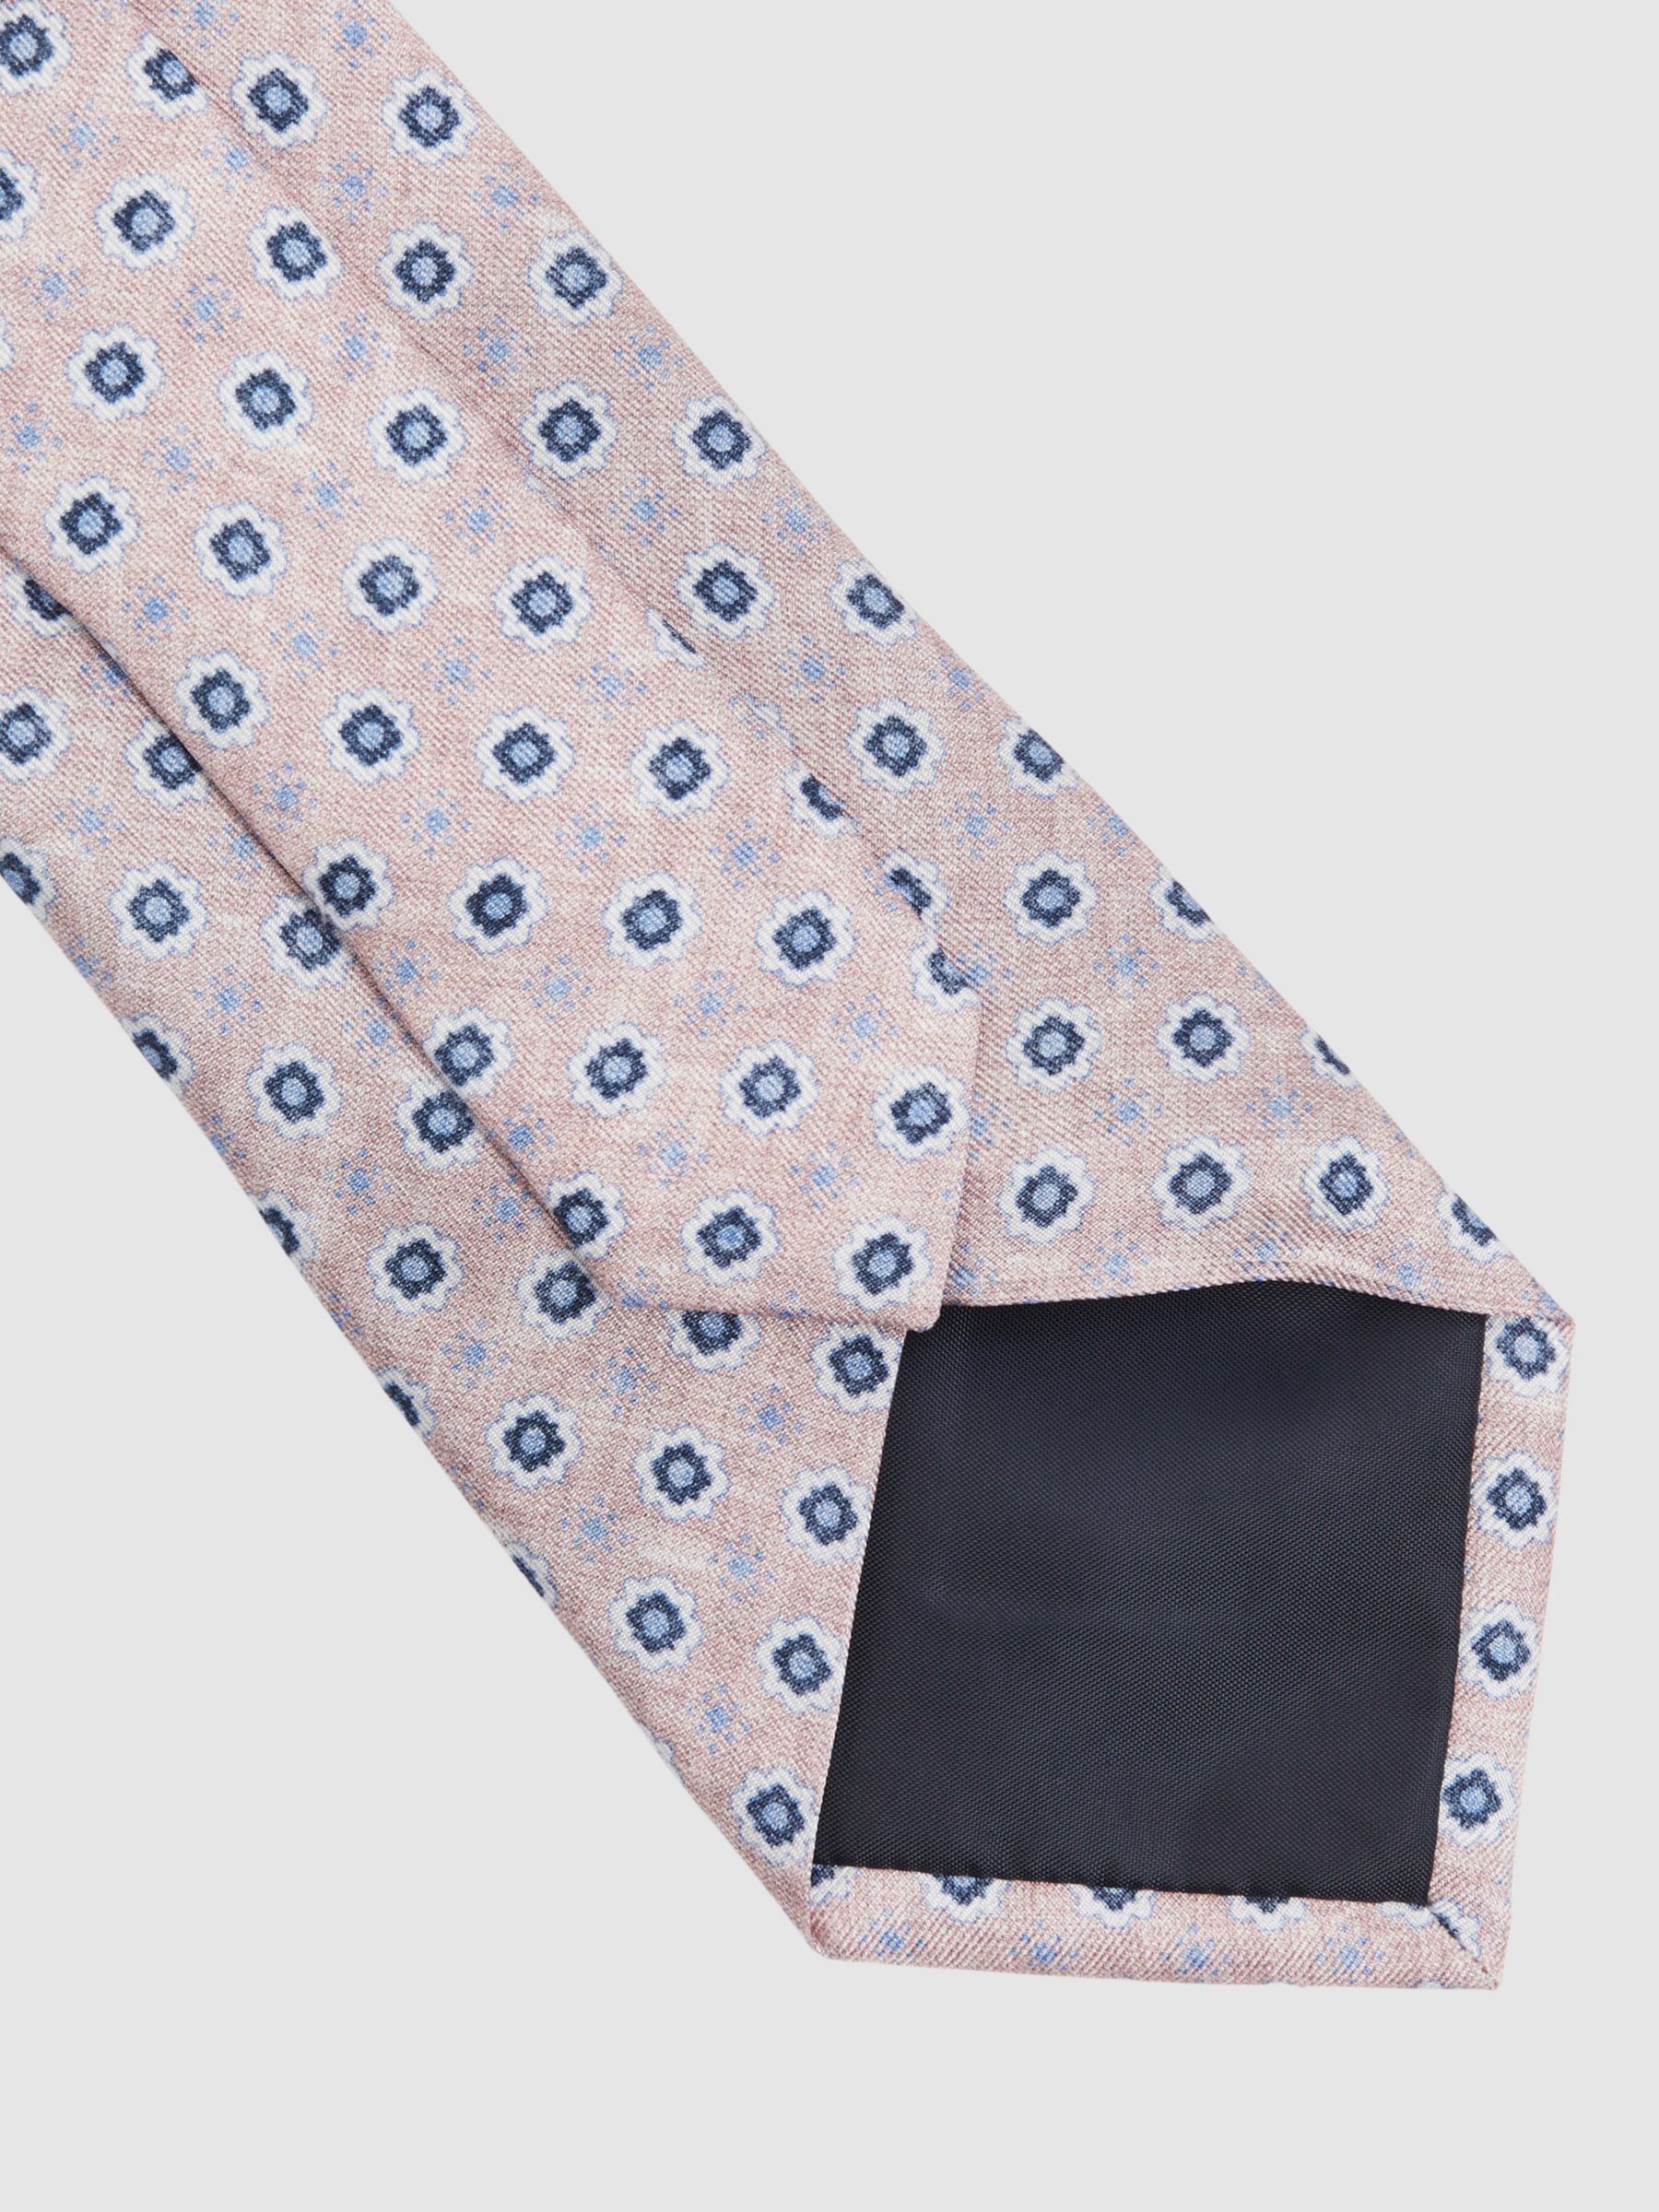 Buy Reiss Basilica Small Floral Print Silk Tie Online at johnlewis.com